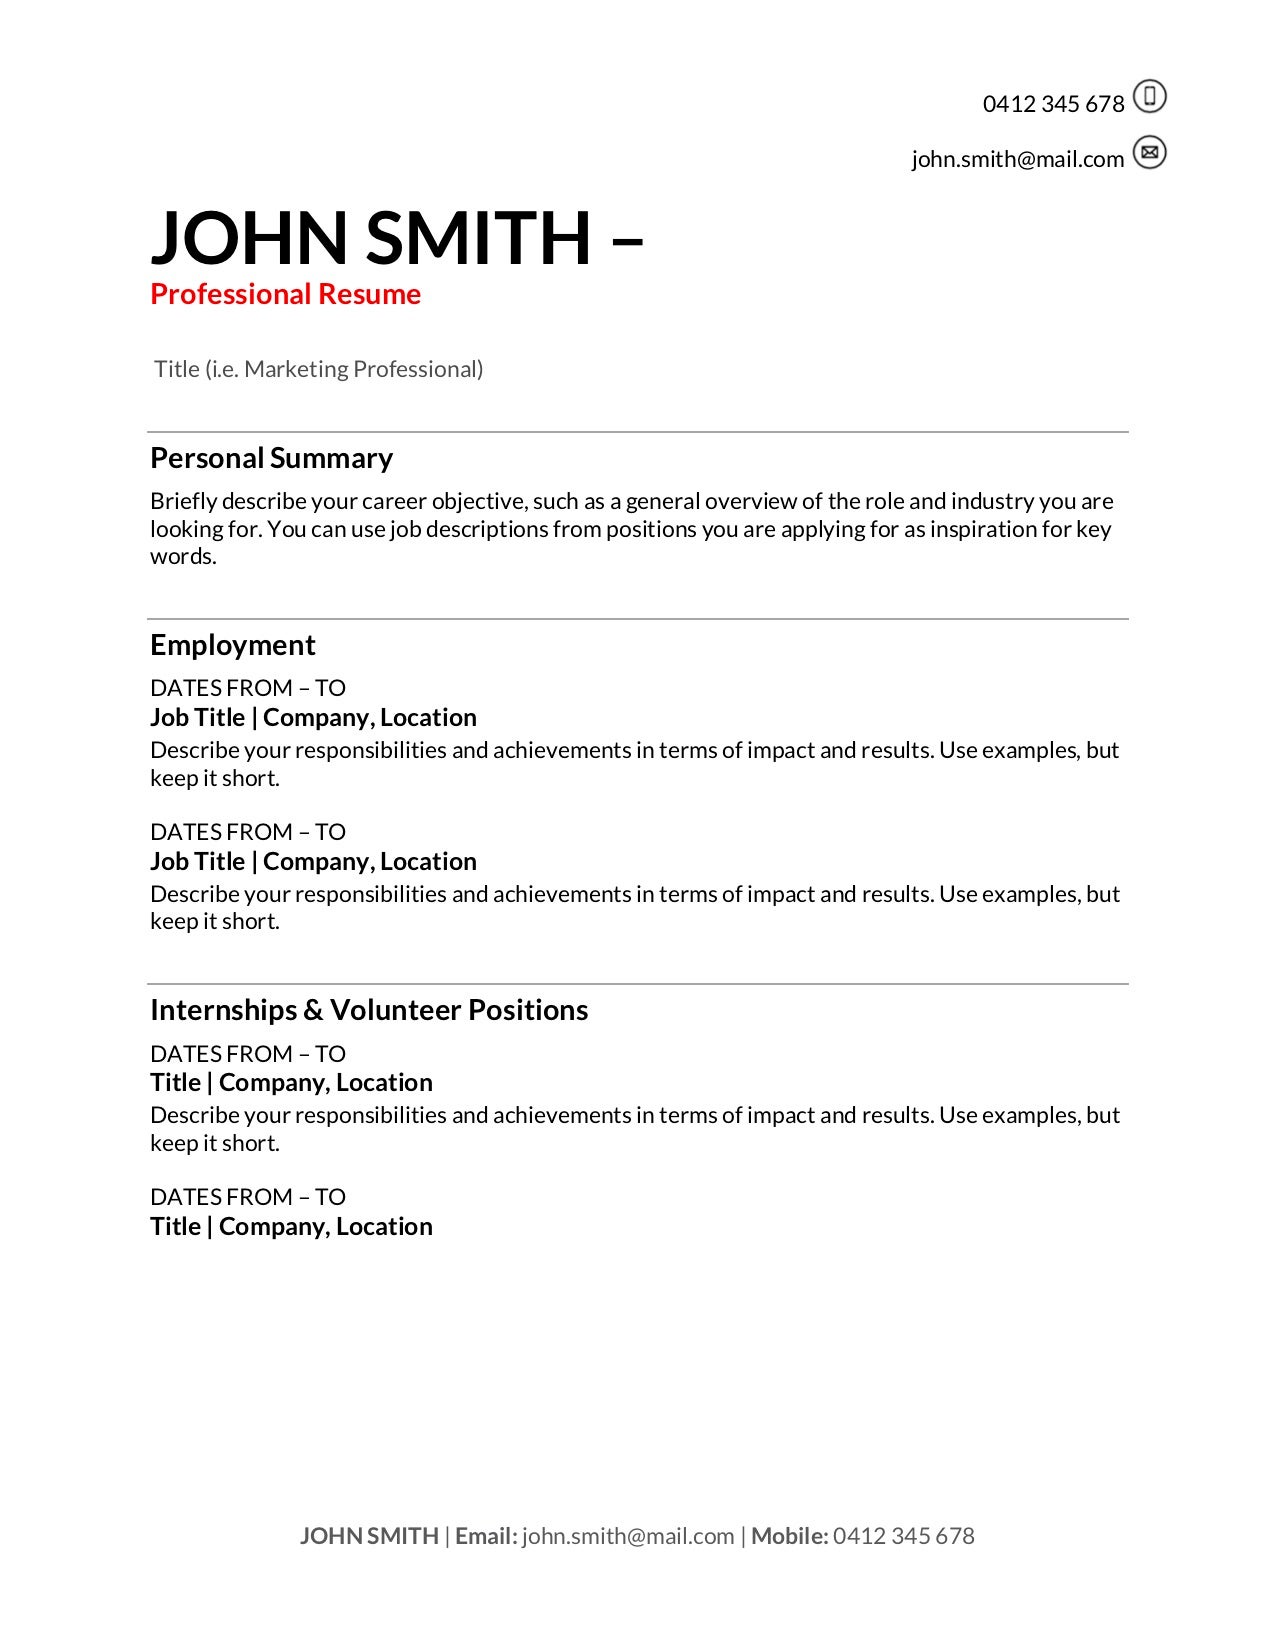 Free Resume Templates [Download]: How to Write a Resume in 2020 - Training.com.au